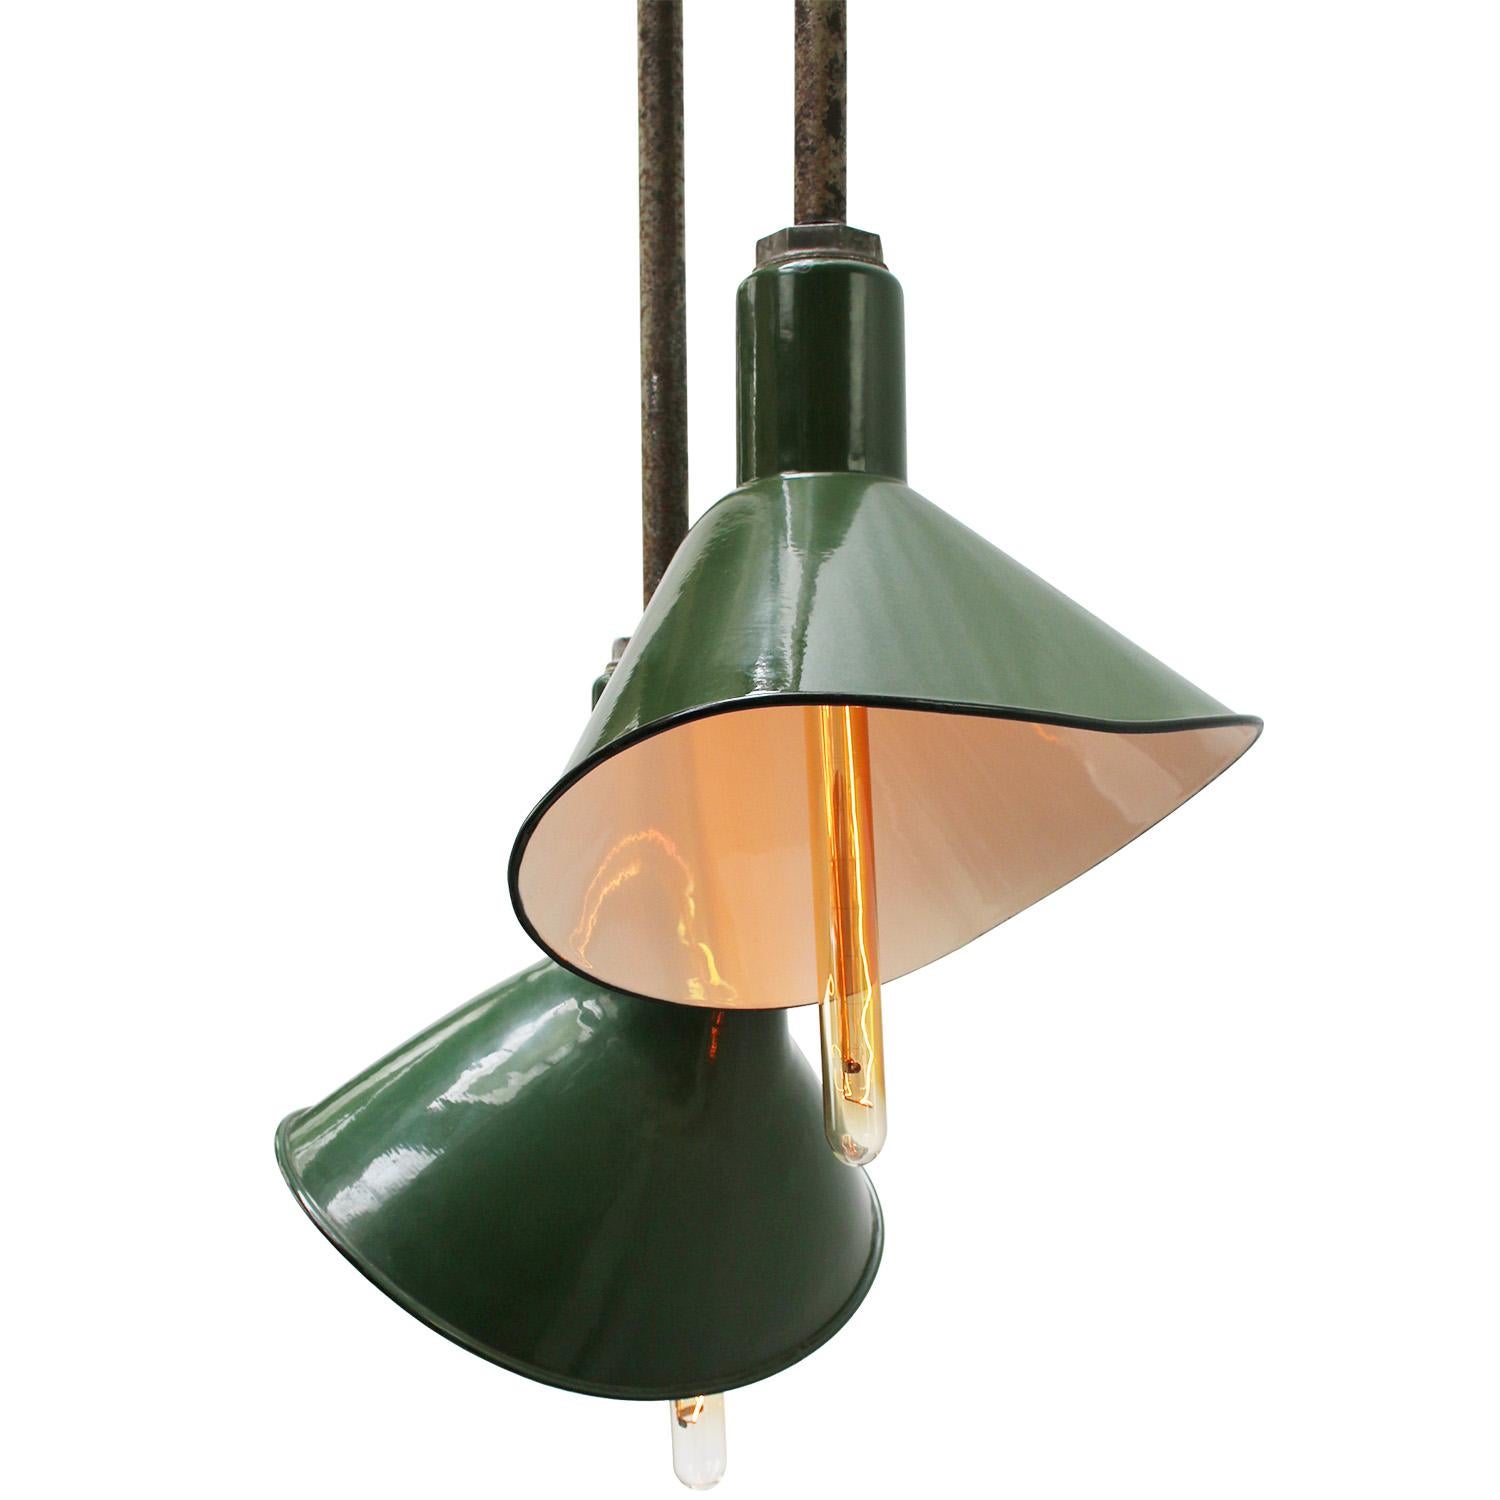 Vintage American asymmetrical green industrial ceiling lamp.
Green enamel. Rare model.

Diameter ceiling plate 4.25” / 108 mm

Weight: 7.00 kg / 15.4 lb

Priced per individual item. All lamps have been made suitable by international standards